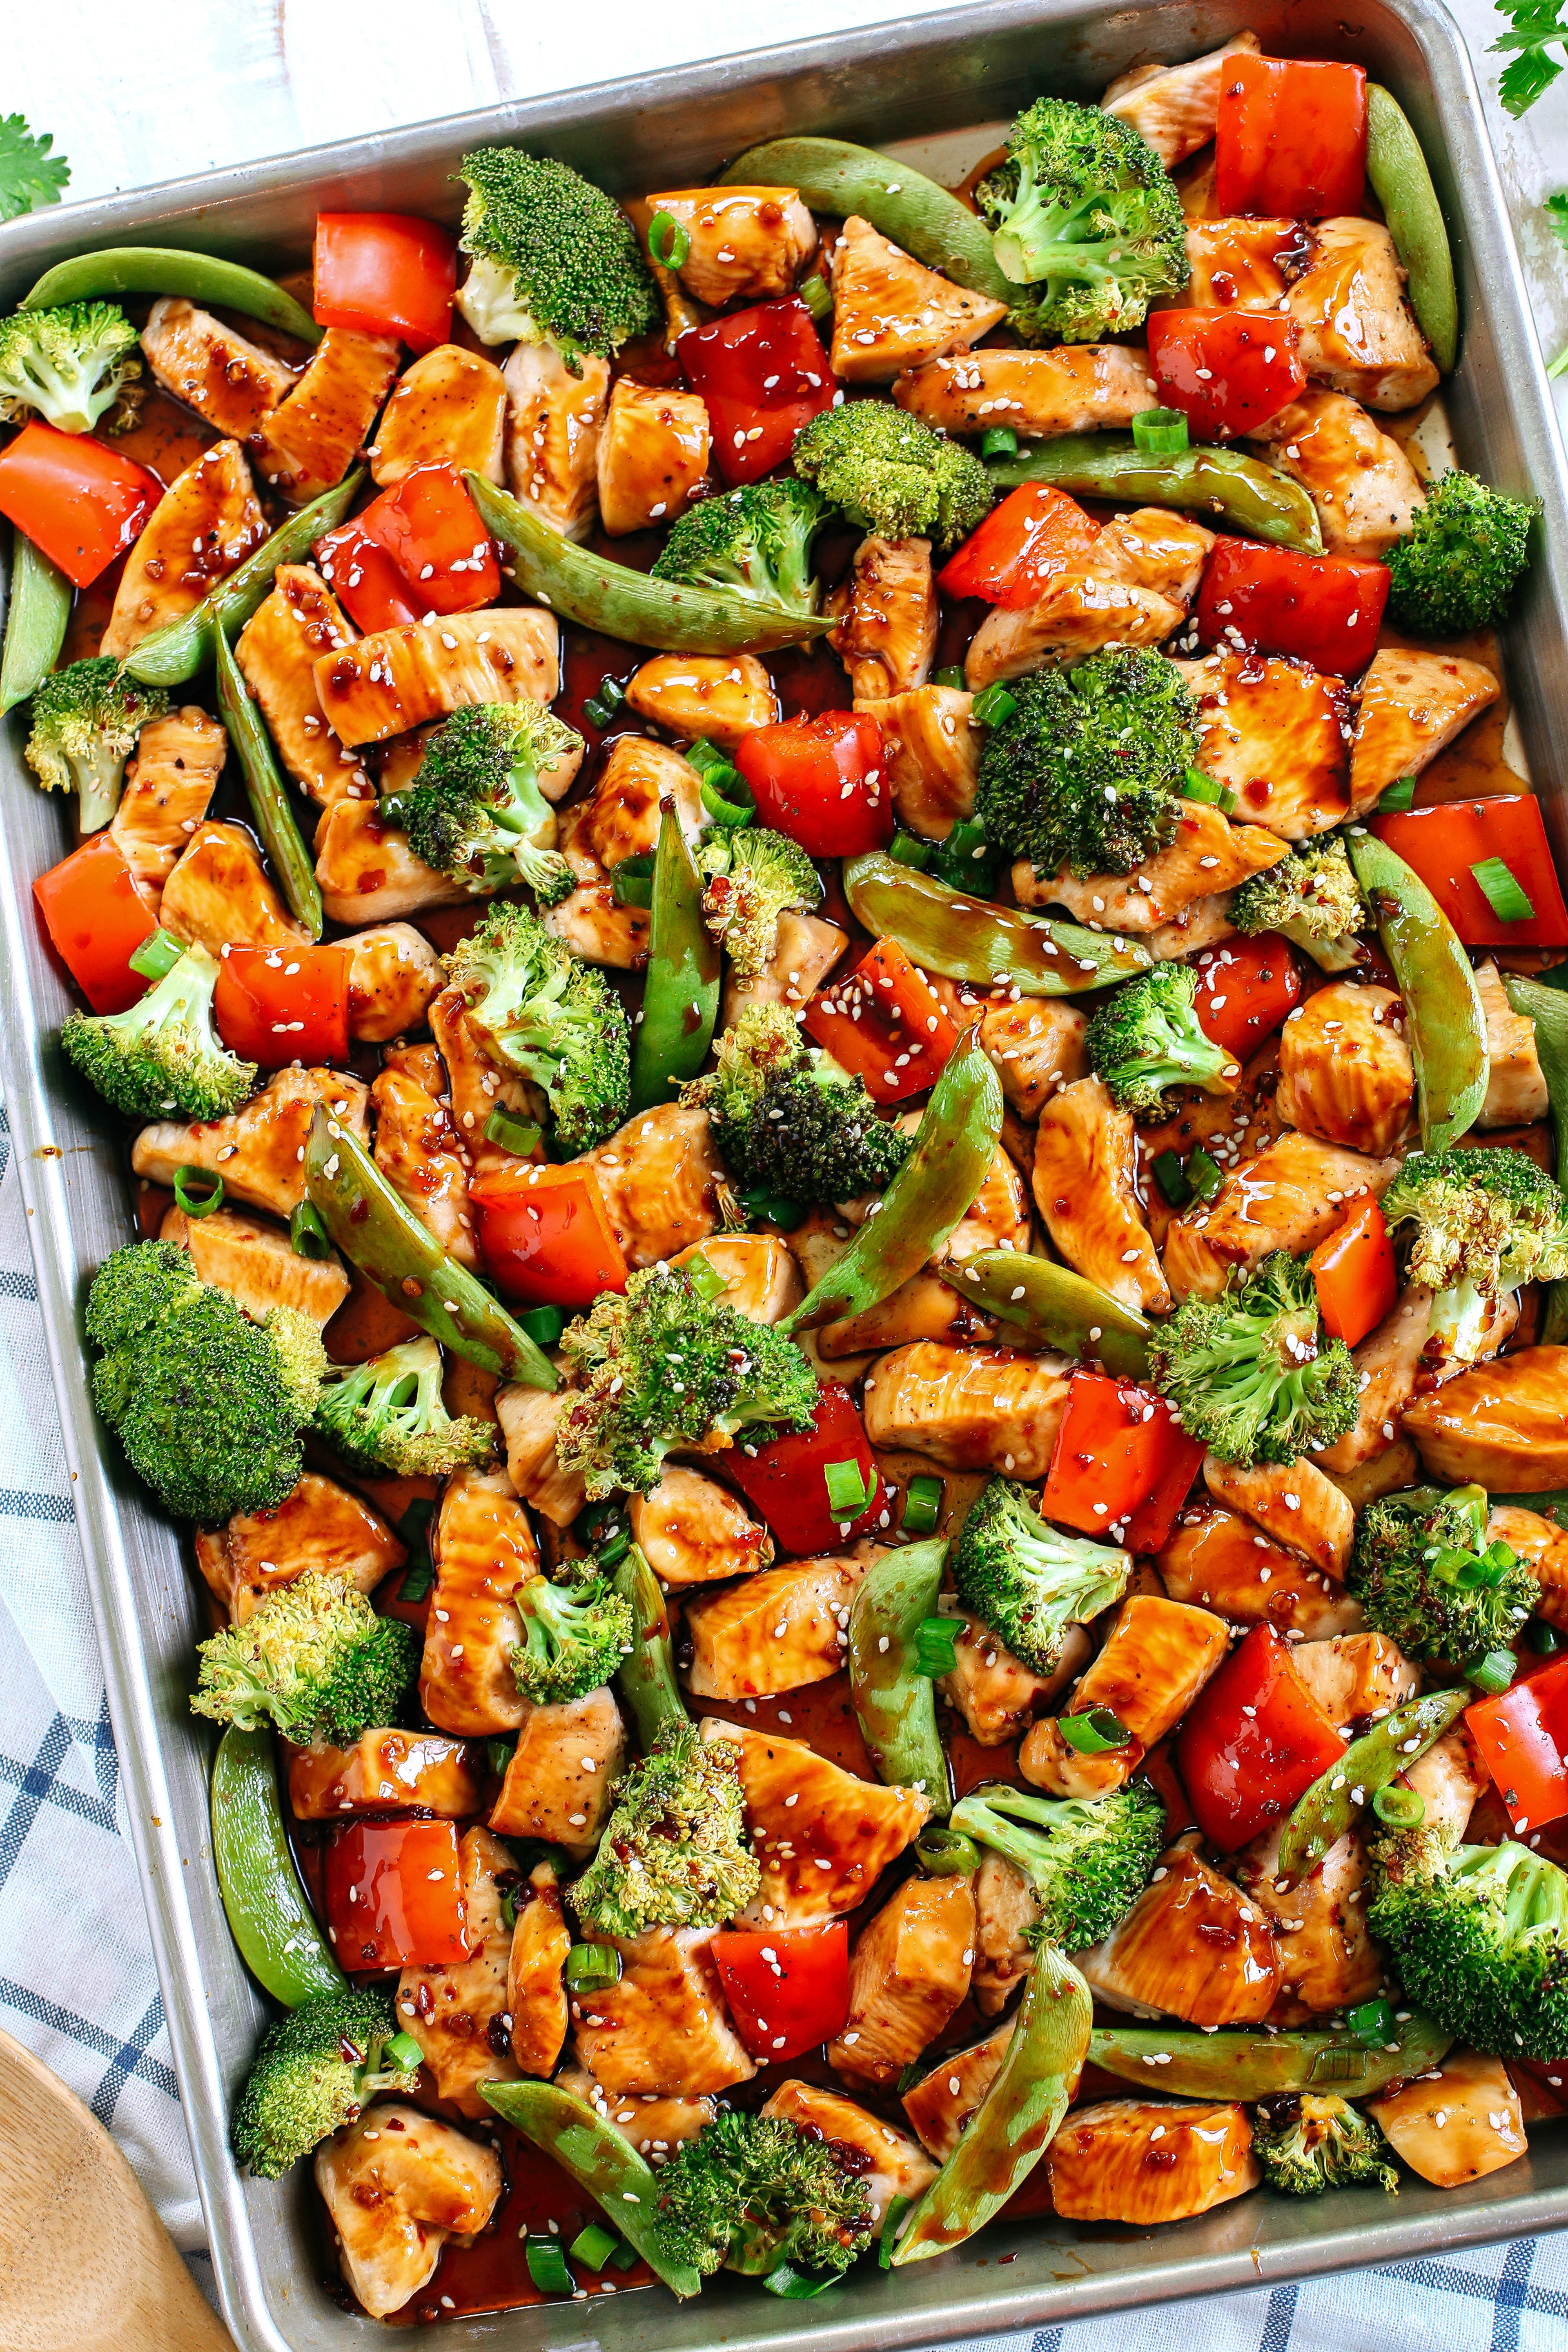 This Sheet Pan Sesame Chicken and Veggies makes the perfect weeknight dinner that’s healthy, delicious and easily made all on one pan in under 30 minutes!  Perfect recipe for your Sunday meal prep too!  